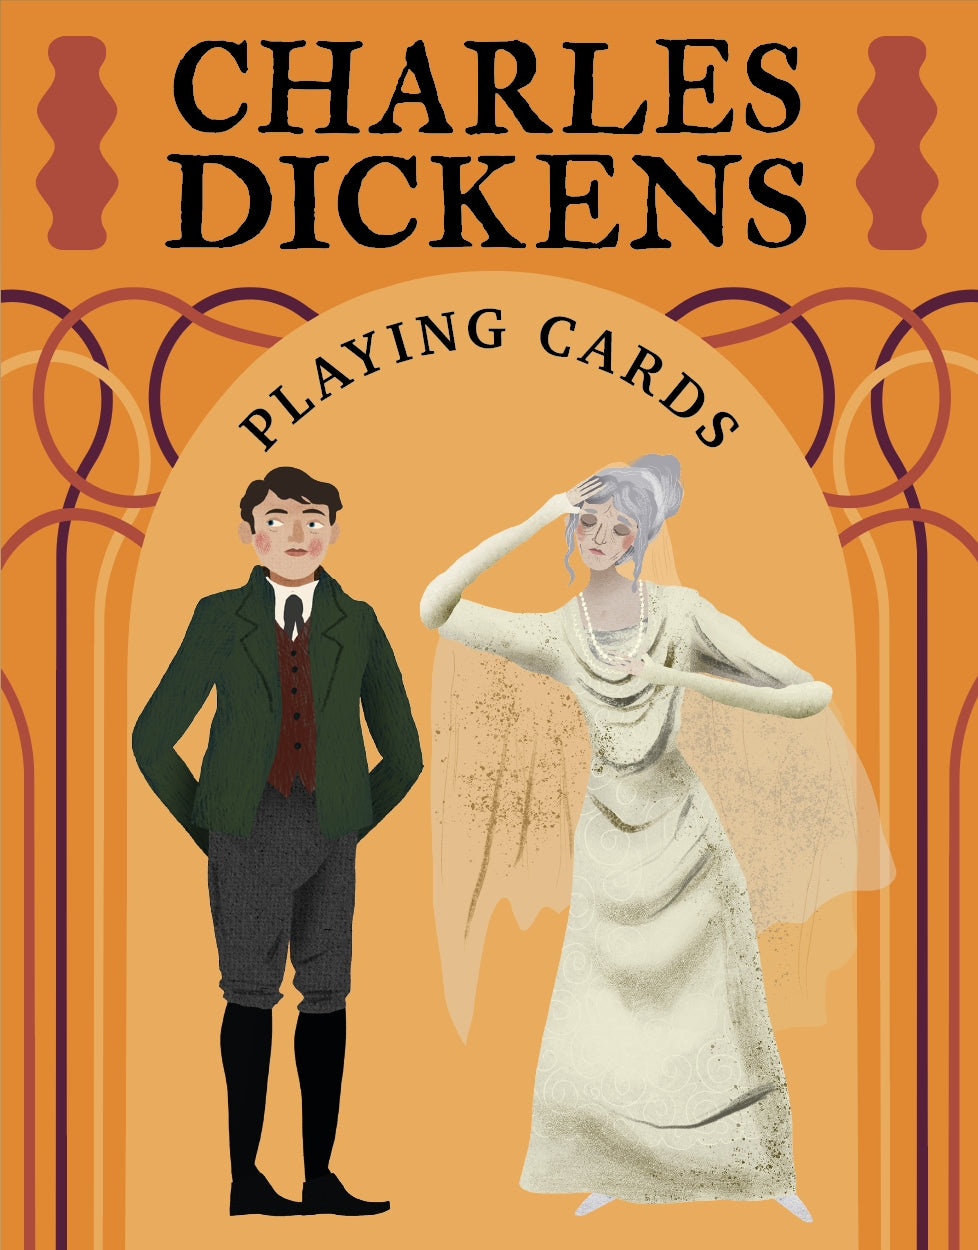 Charles Dickens Playing Cards by Barry Falls, John Mullan